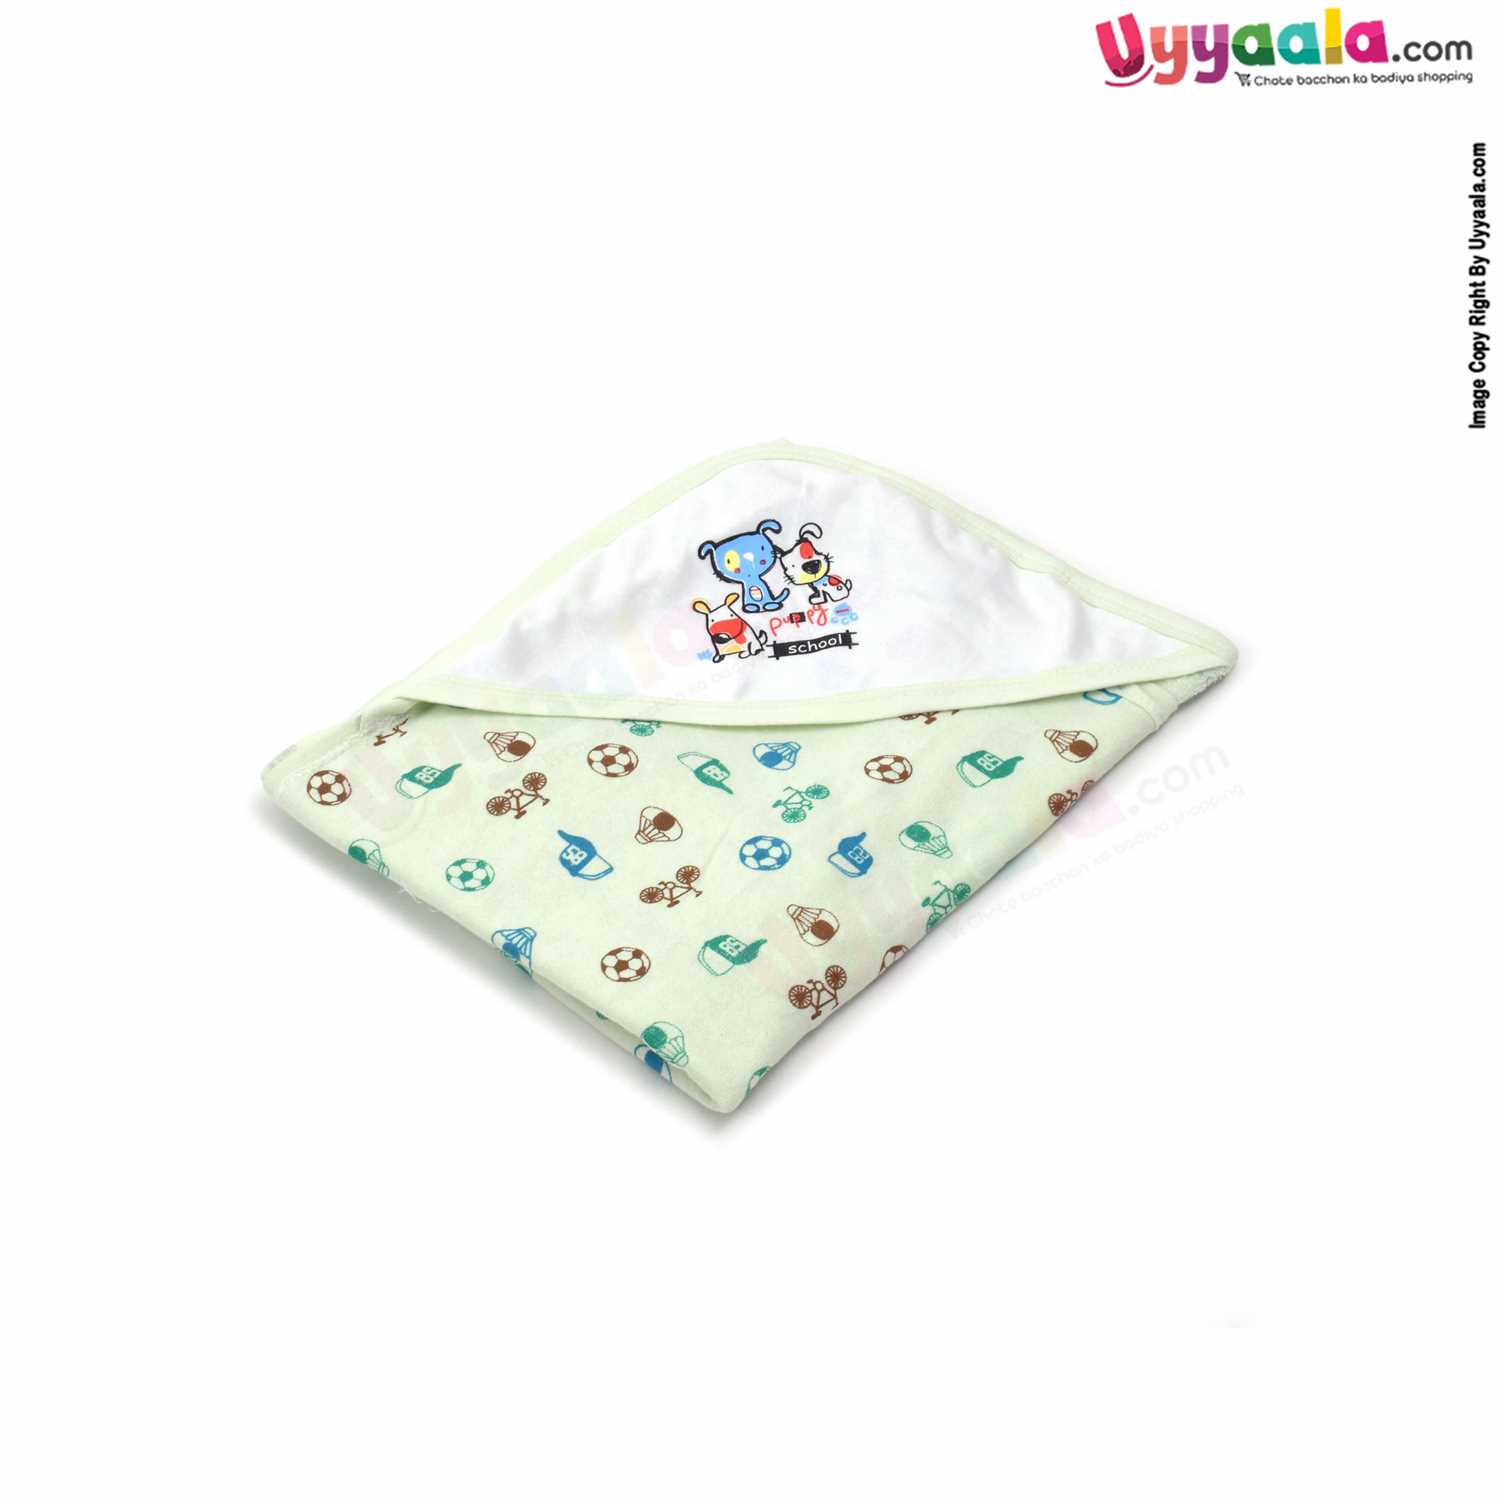 ZERO Baby Bath Soft 100% Cotton Towel with Foot Ball & Cycle Print 0+m Age, Size (84*76cm)- Light Green